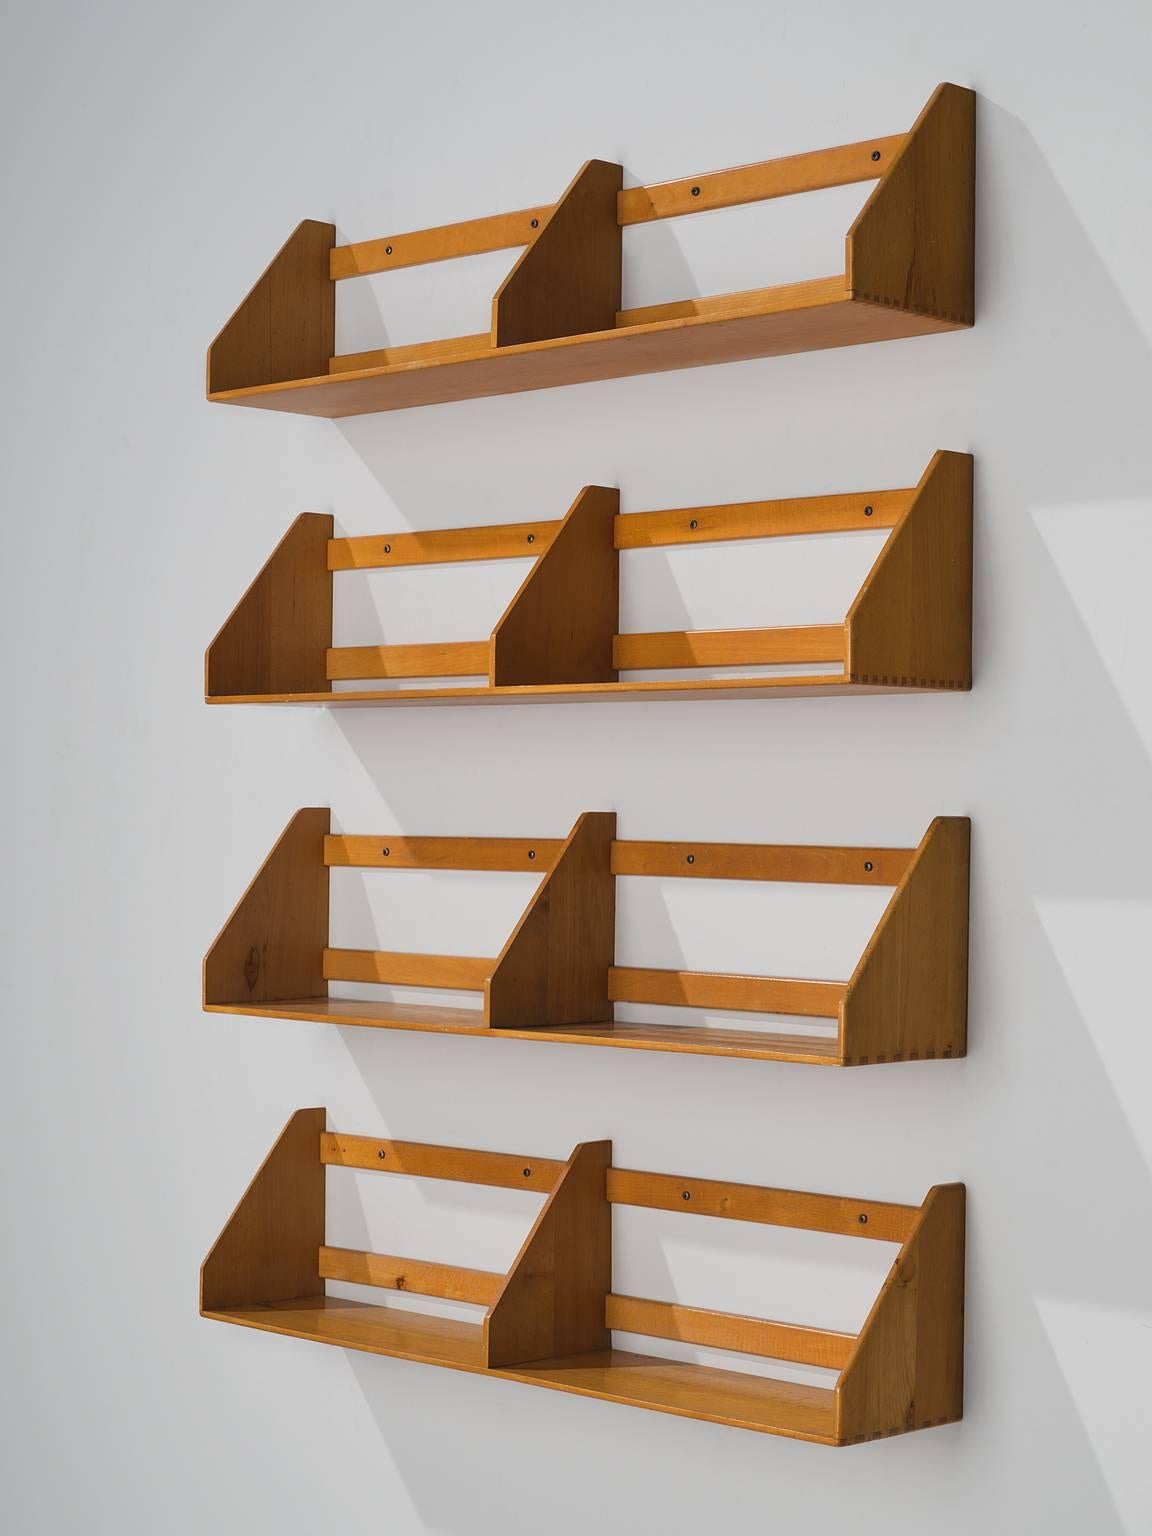 Børge Mogensen for FDB, B-5 shelves, beech, Denmark, 1950s.

This set of four bookshelves is executed in beech and is part of the midcentury design collection. The detailing in on the sides of the shelves is one of the distinctive parts as the